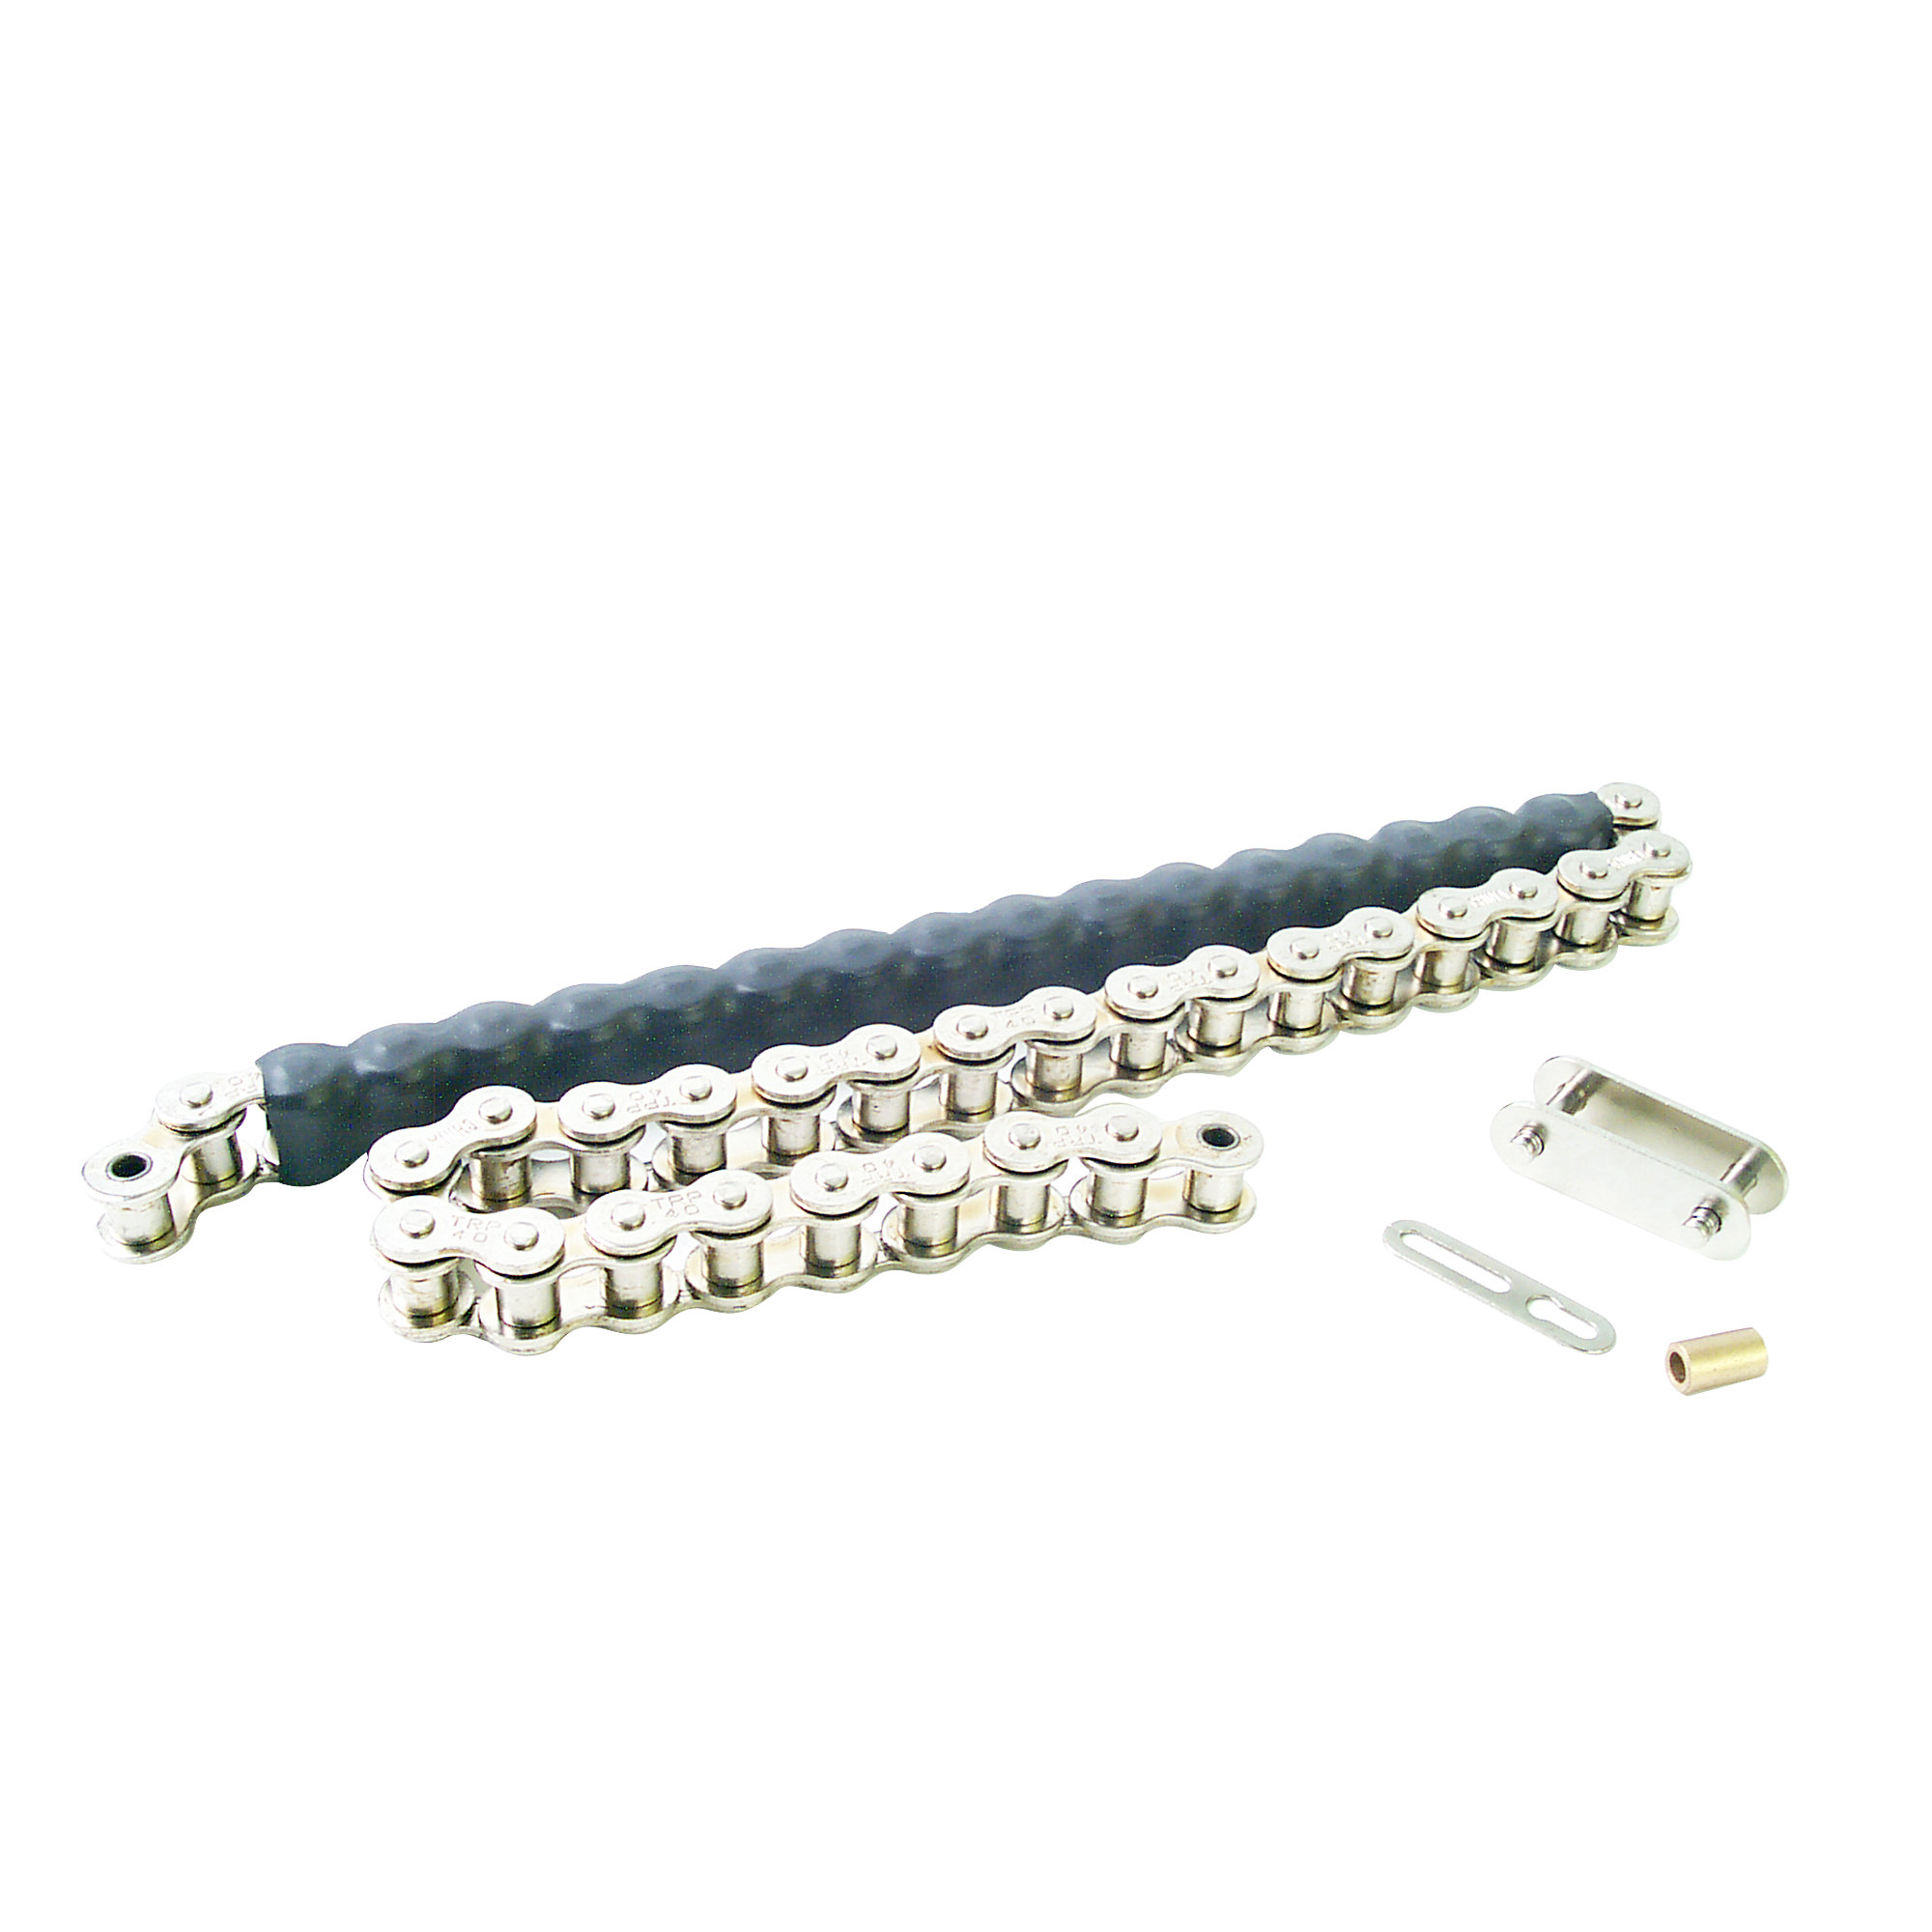 Chain, Water Proof with Master Link *Mfg Date prior to 4-21-98*